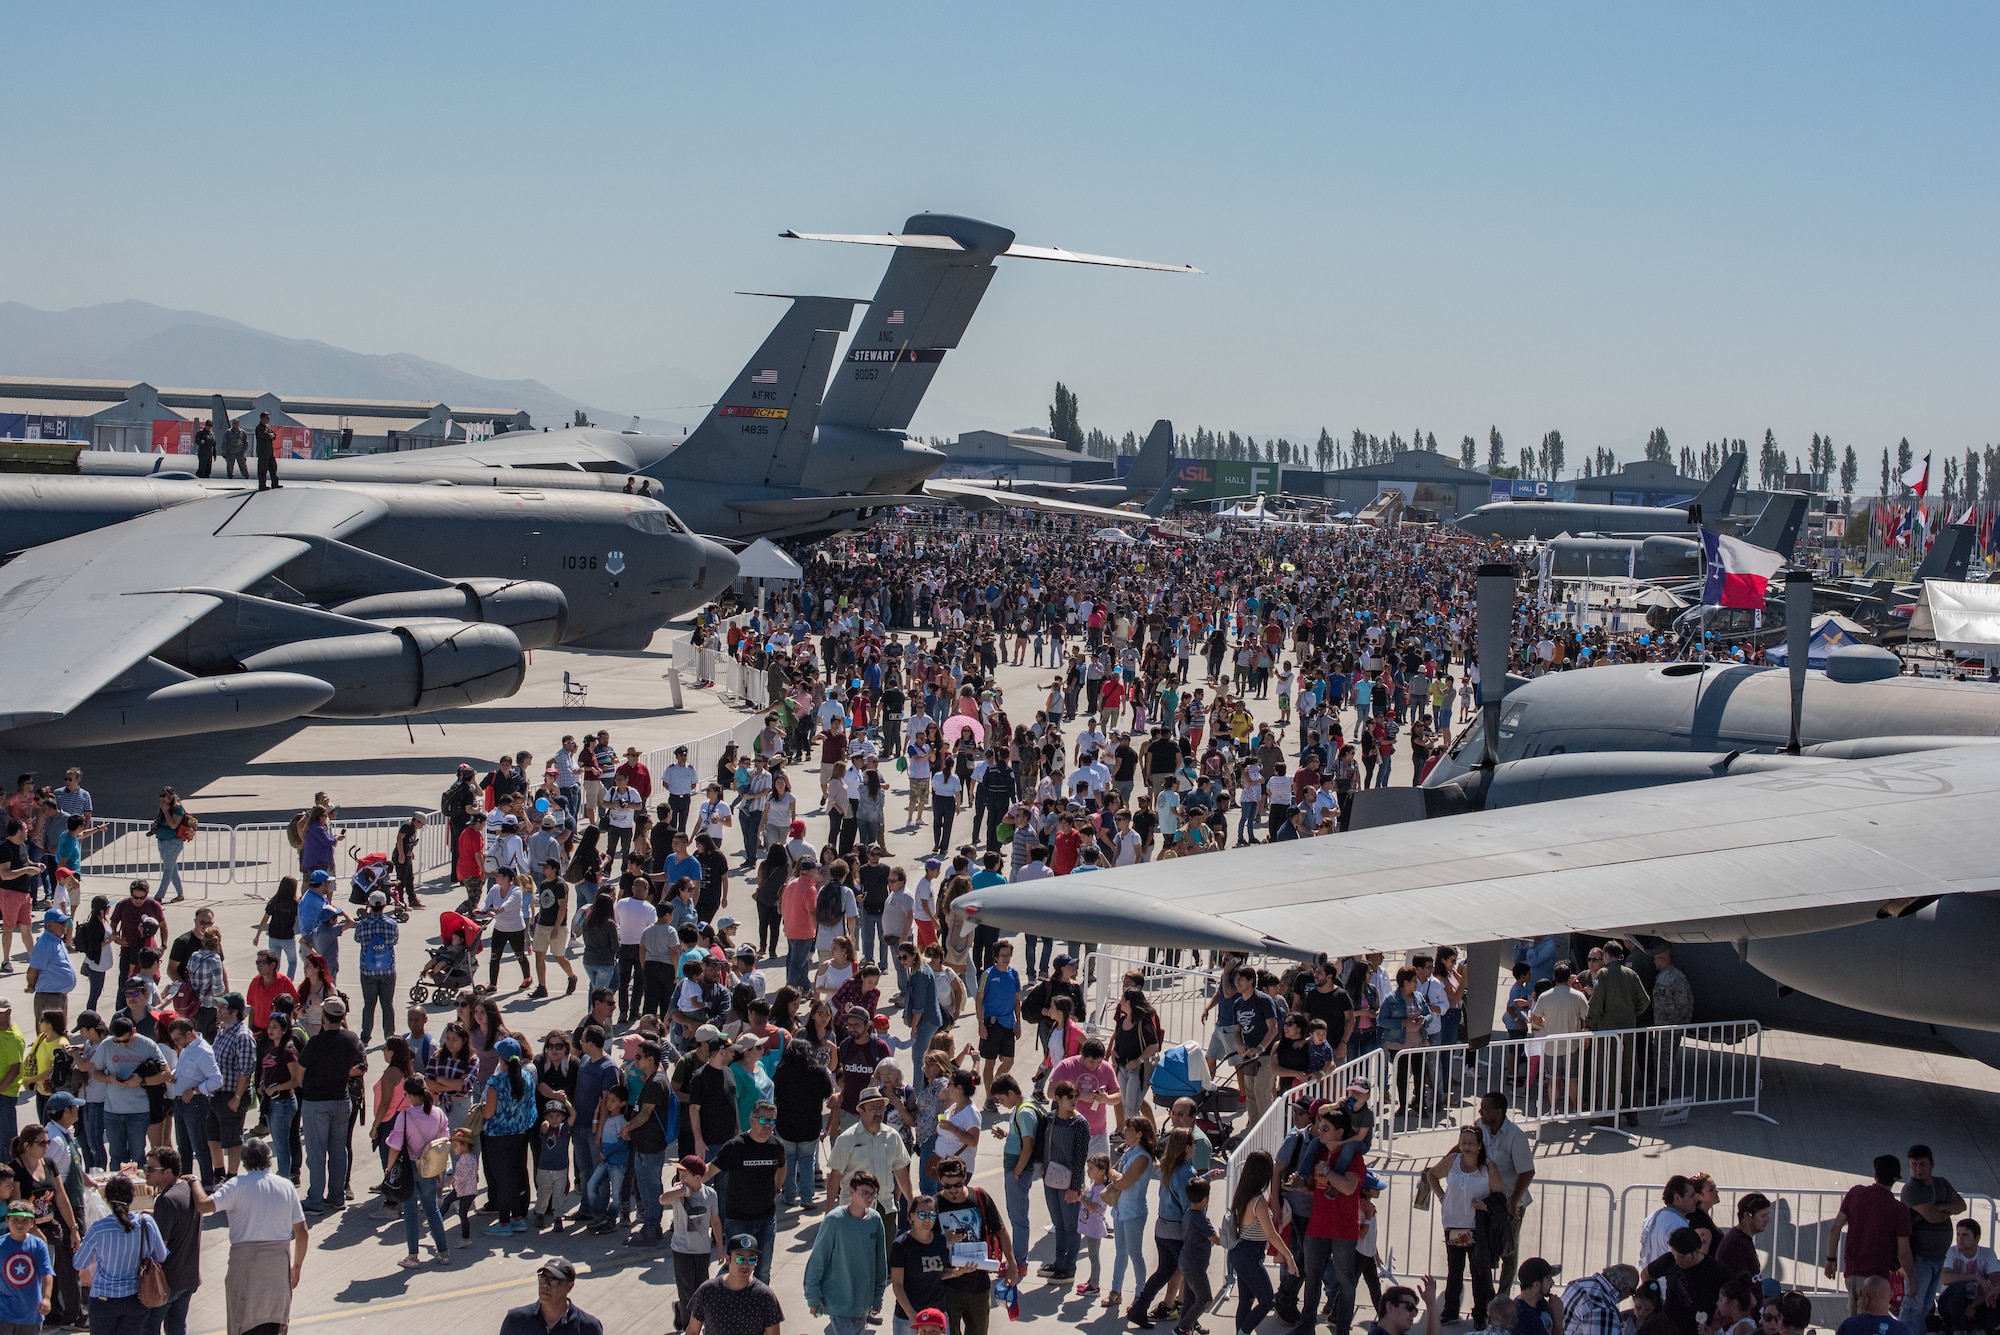 Members of the Chilean public walk through the airshow fairgrounds during the FIDAE 2018 international airshow in Santiago, Chile, April 8, 2018.  U.S. airmen participated in a variety of activities during the air show, including subject matter exchanges with the Chilean Air Force, aerial demonstrations, and interaction with the local community.  (U.S. Air Force photo by Staff Sgt. Danny Rangel)